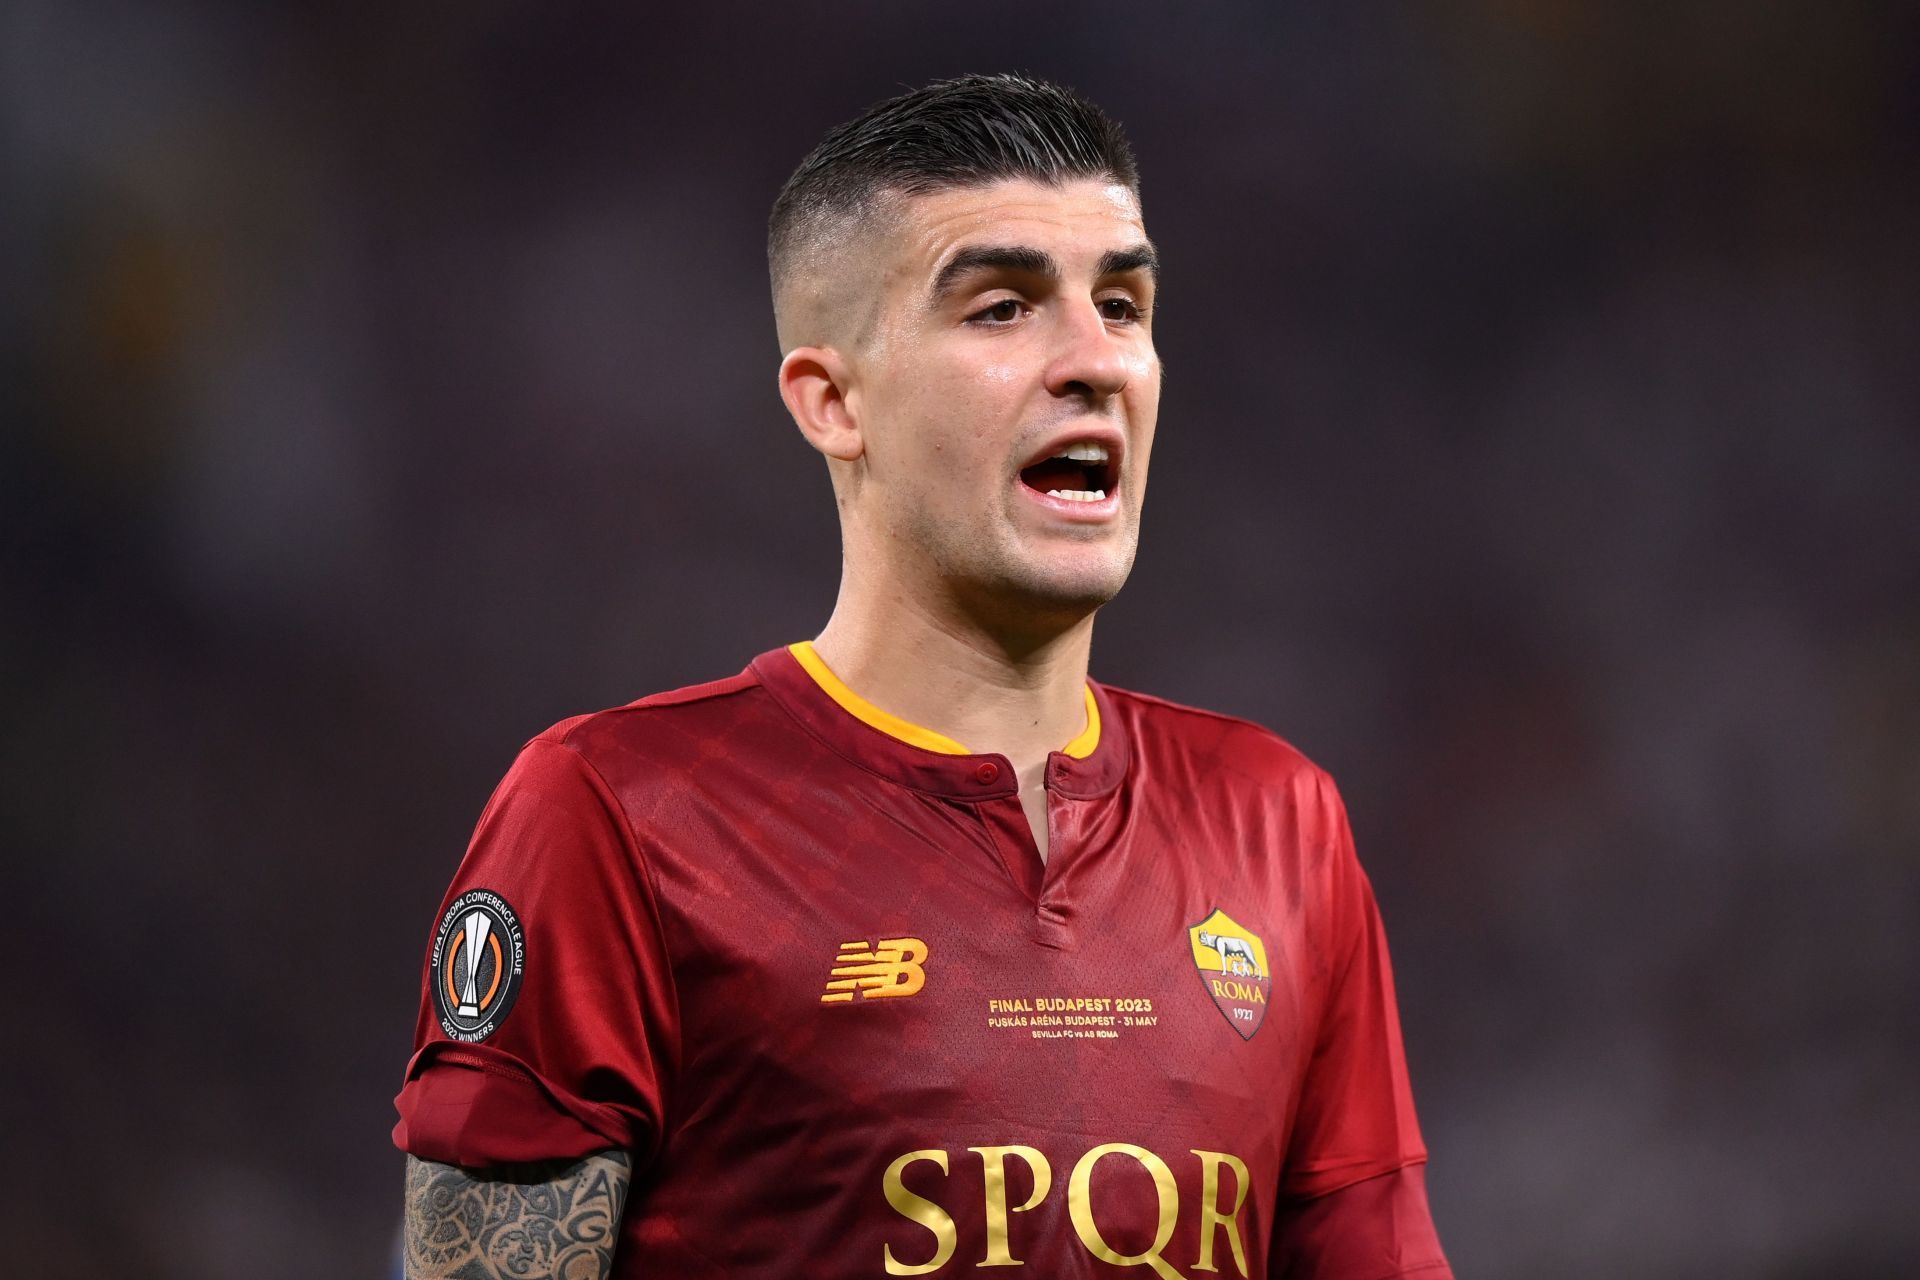 Gianluca Mancini scored an own goal and missed his penalty in the Europa League final.